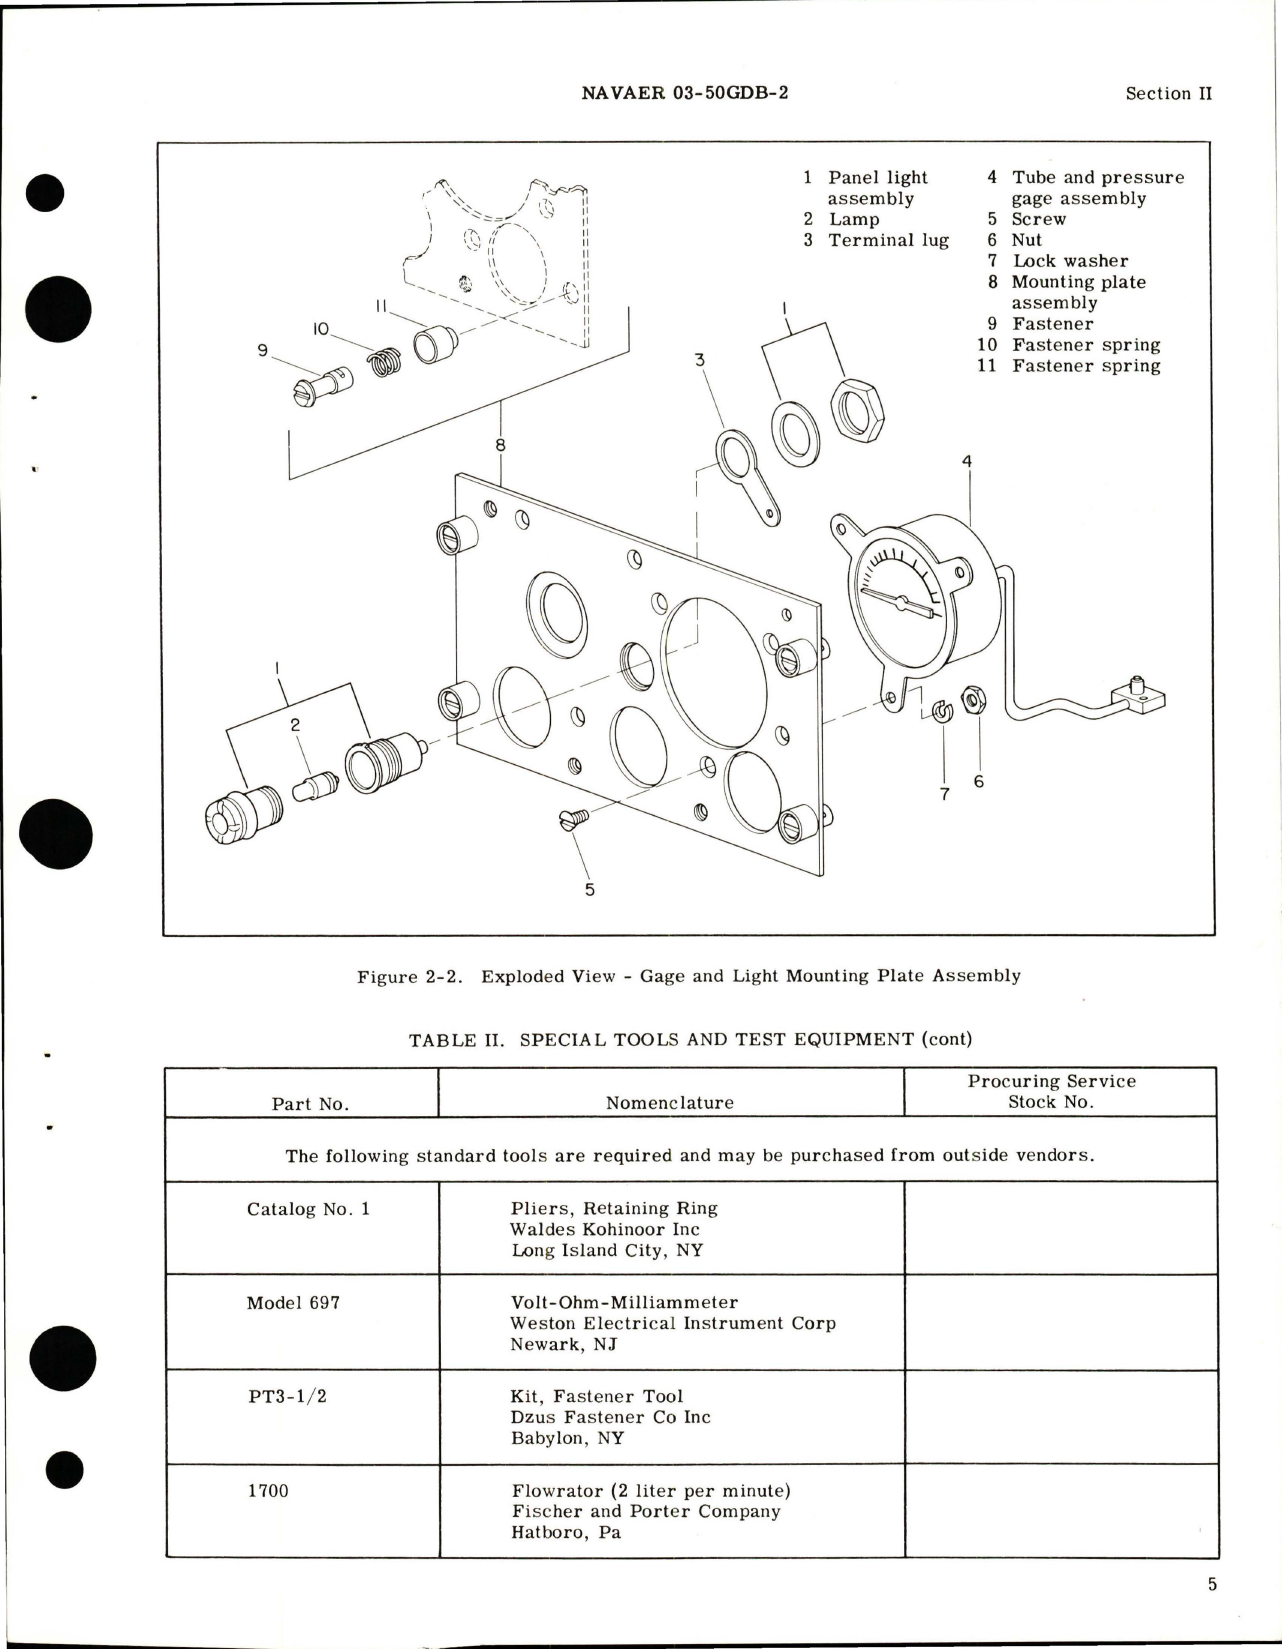 Sample page 9 from AirCorps Library document: Overhaul Instructions for Automatic Diluter Demand Pressure Breathing Oxygen Regulator - Parts 2894-10A-A2, 2894-6B-A4, 2894-10A-B2, 2894-6B-B2, and 2894-10A-A2A